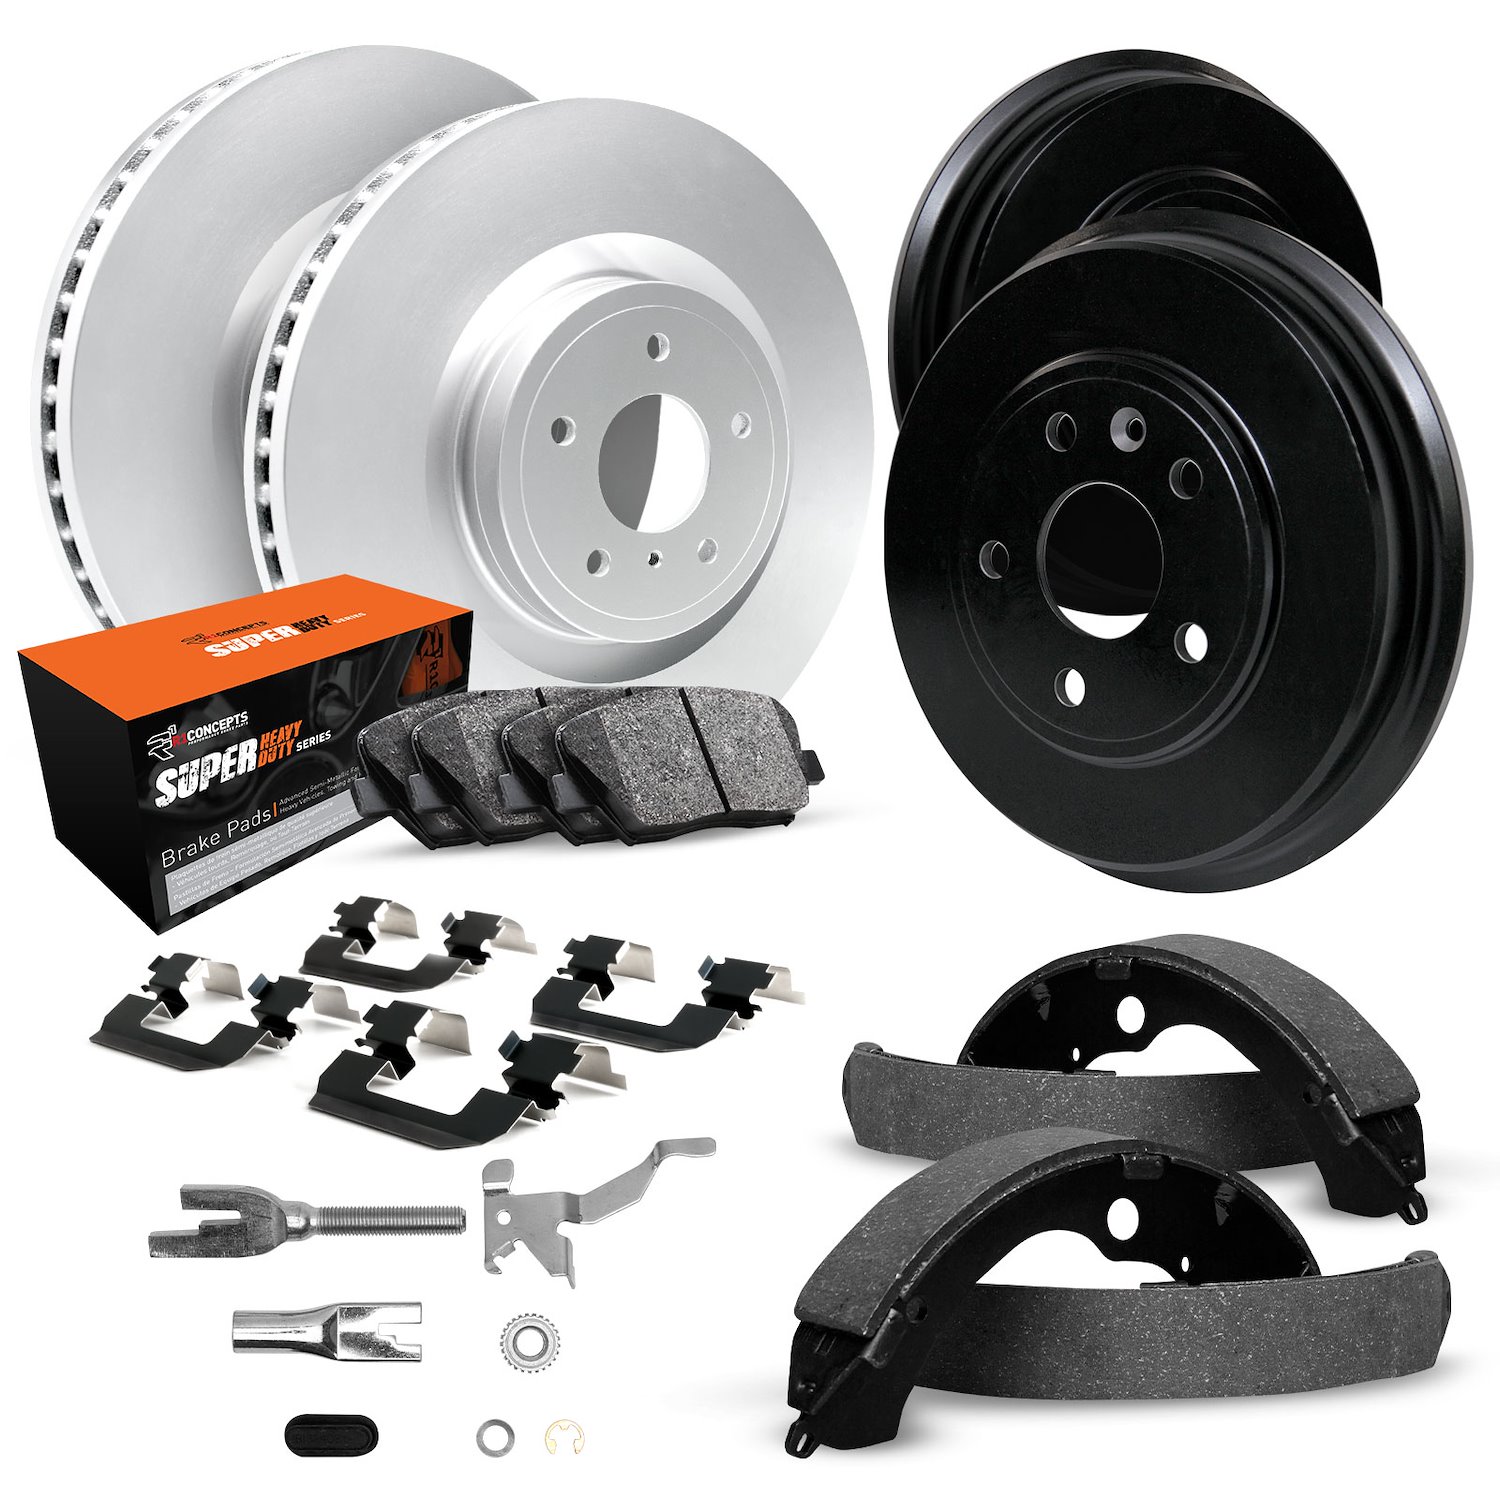 GEO-Carbon Brake Rotor & Drum Set w/Super-Duty Pads, Shoes, Hardware/Adjusters, 1995-1996 Ford/Lincoln/Mercury/Mazda